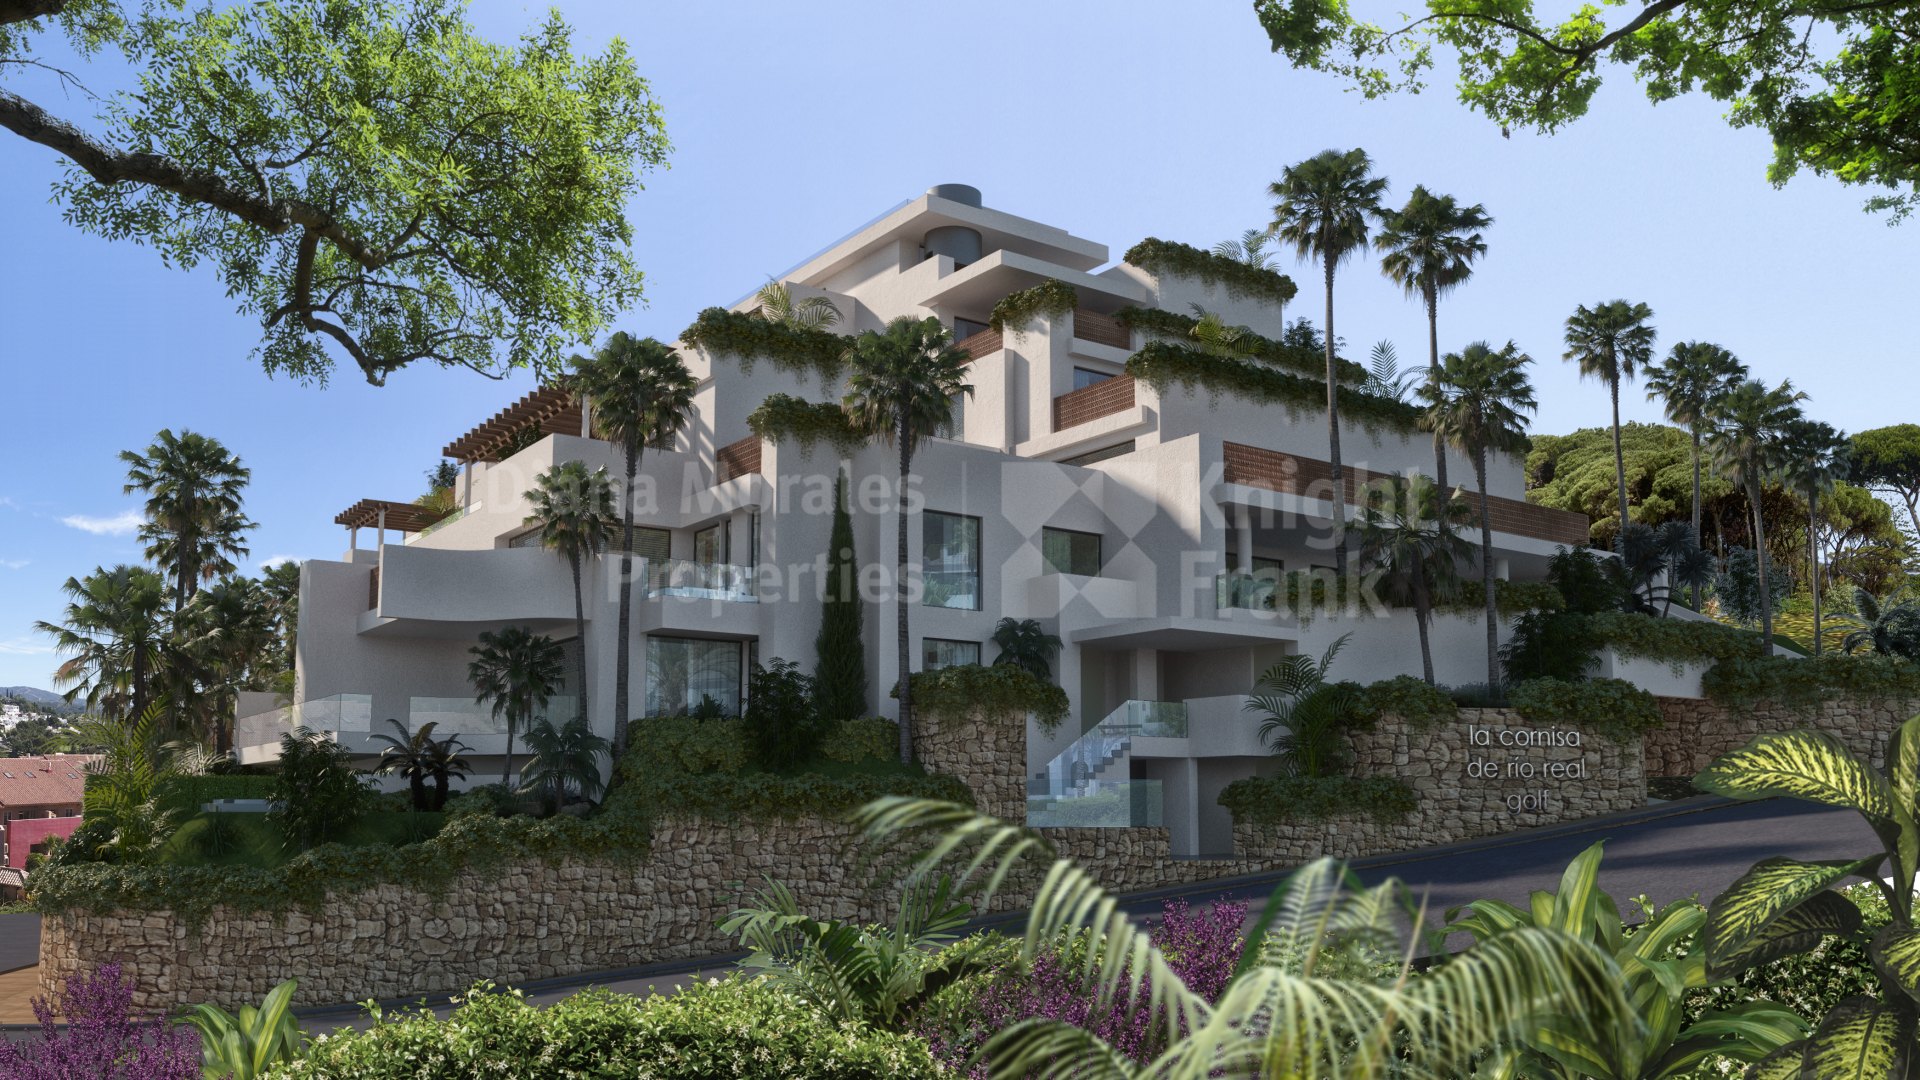 Rio Real Golf, Nice ground floor flat with private garden